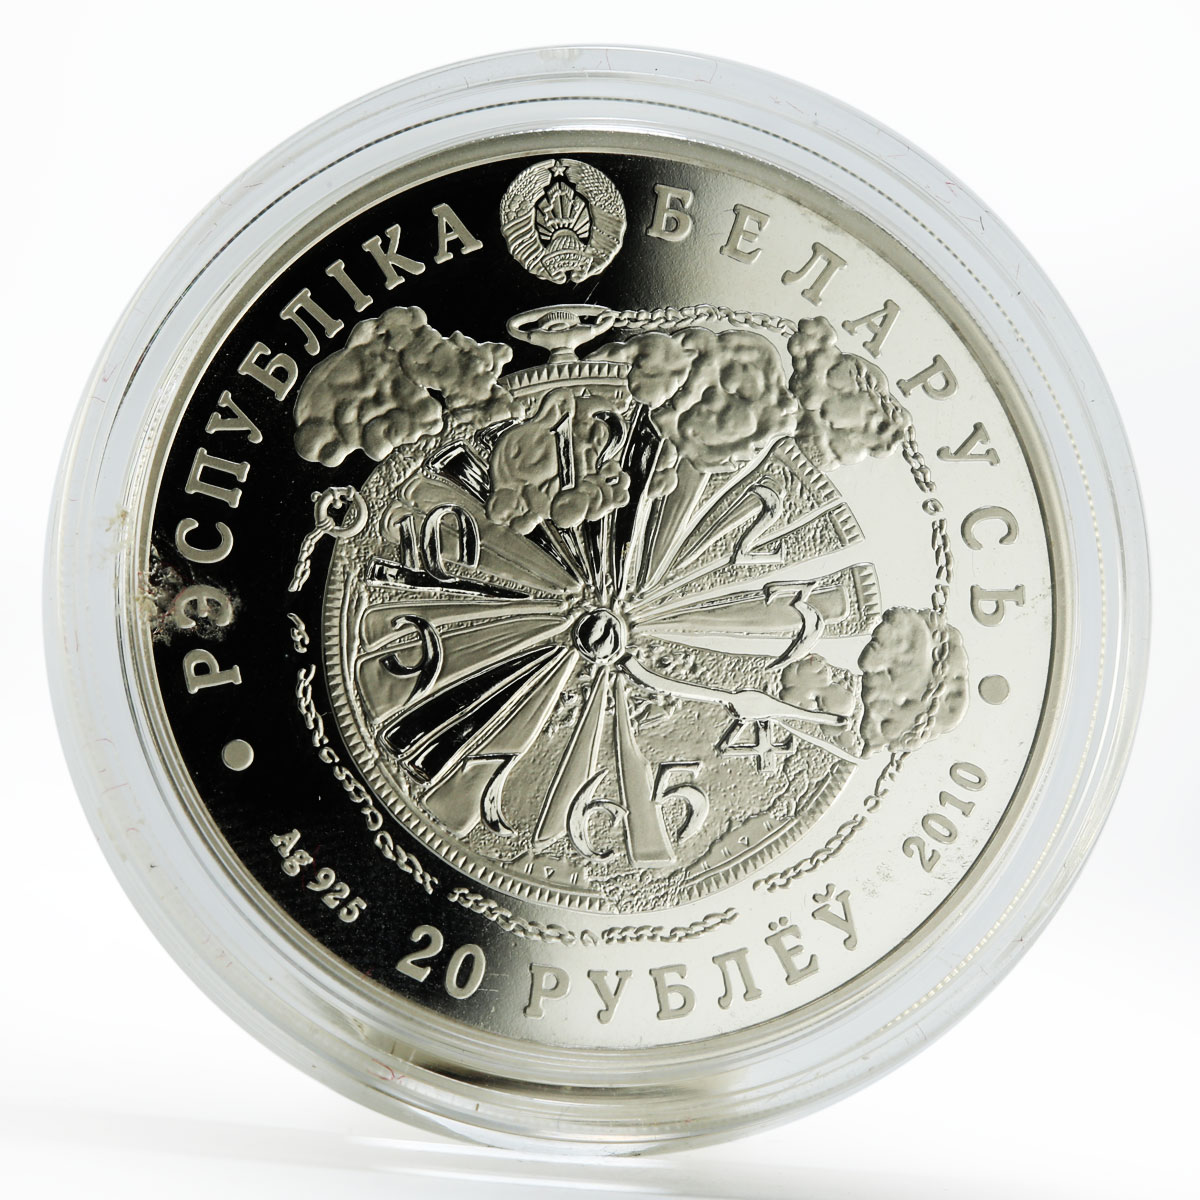 Belarus 20 rubles 65th Victory in Great Patriotic War silver coin 2010